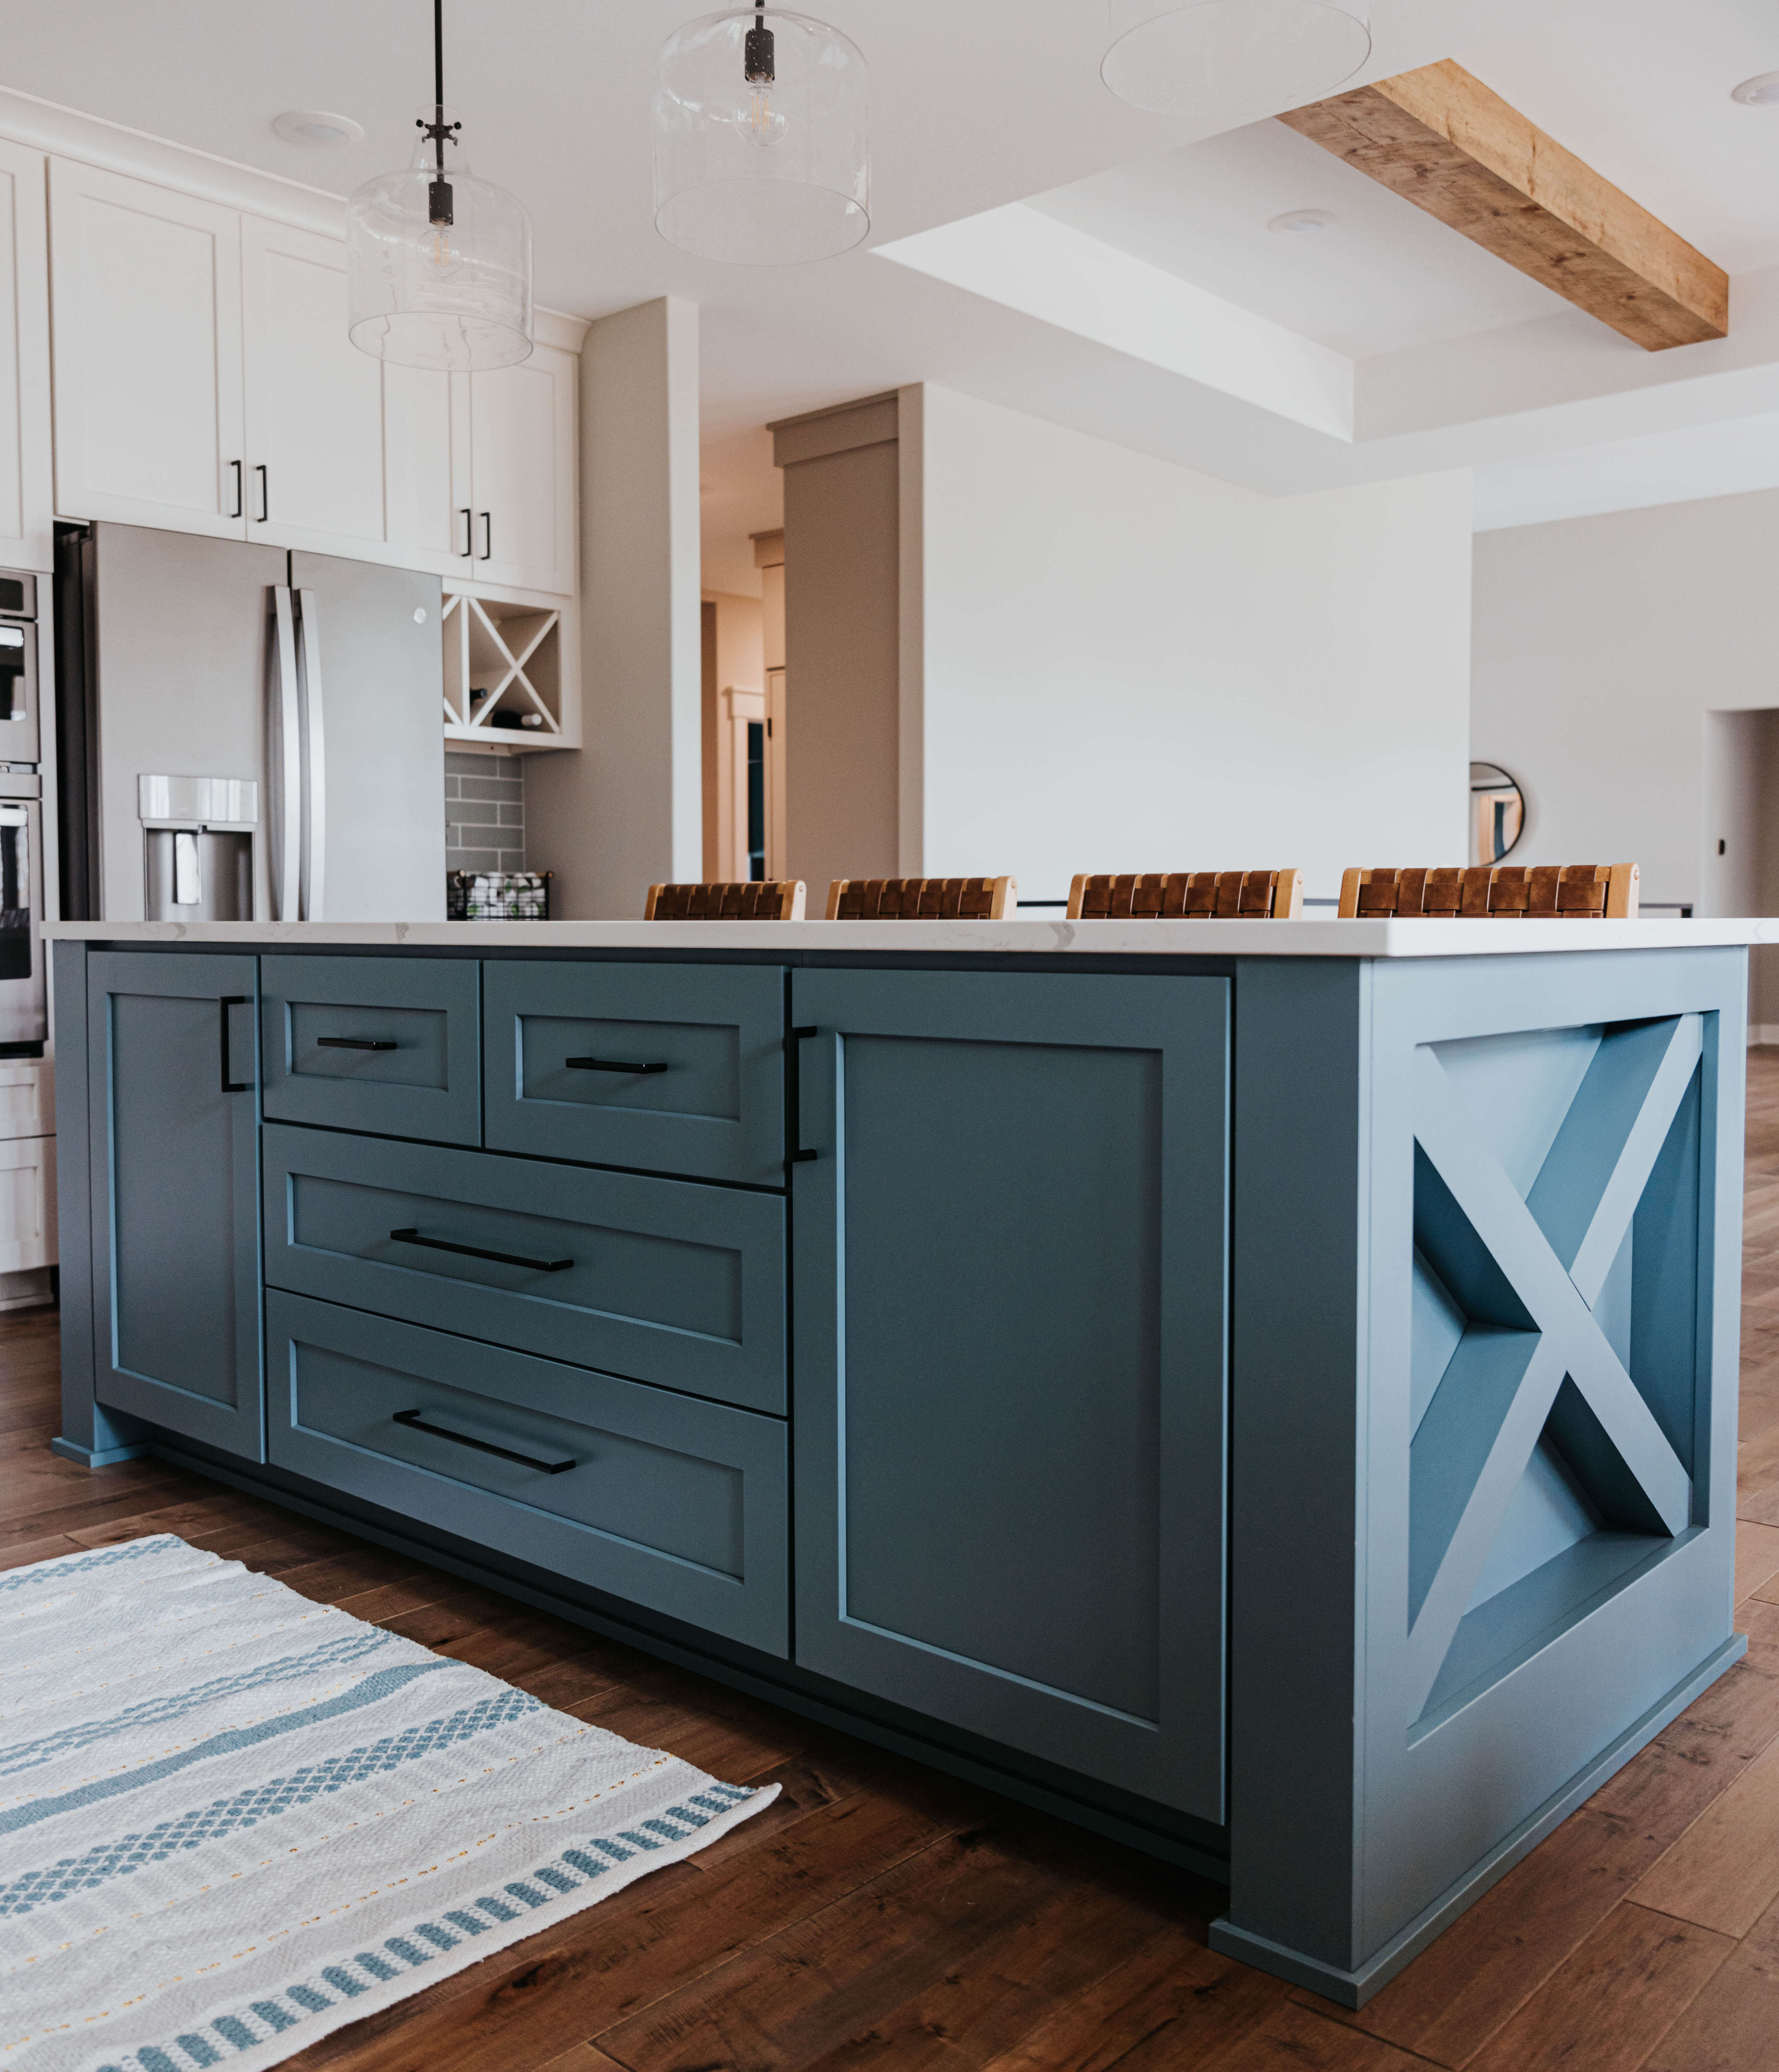 A modern farmhouse kitchen island with a tranquil blue paint color with an X-end cap detail.